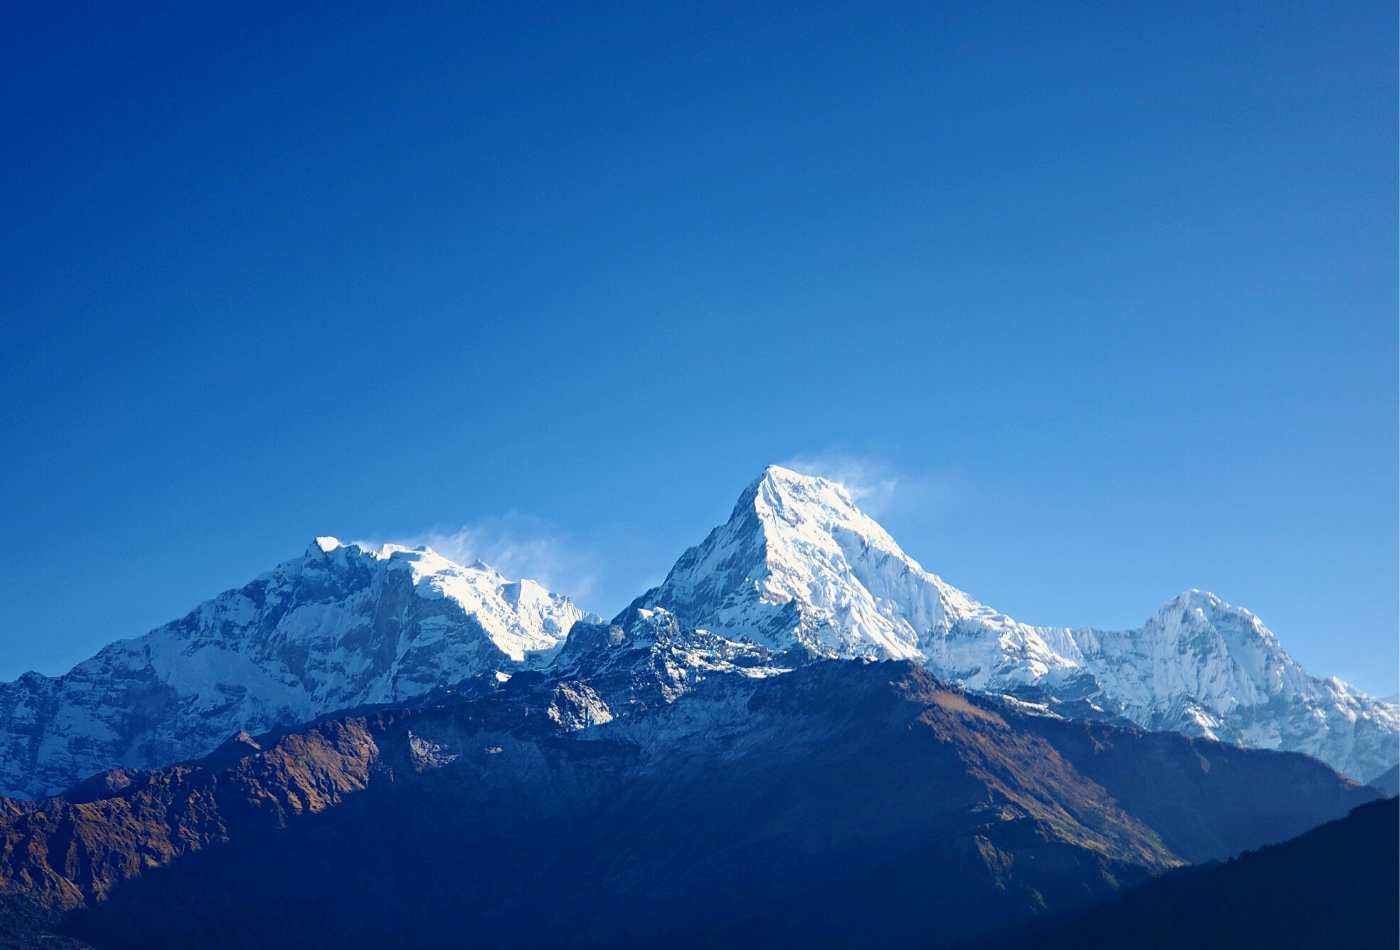 Annapurna Fang, Annapurna South, and Hiunchuli standing tall with snowly summit and blue sky from Poon Hill. 